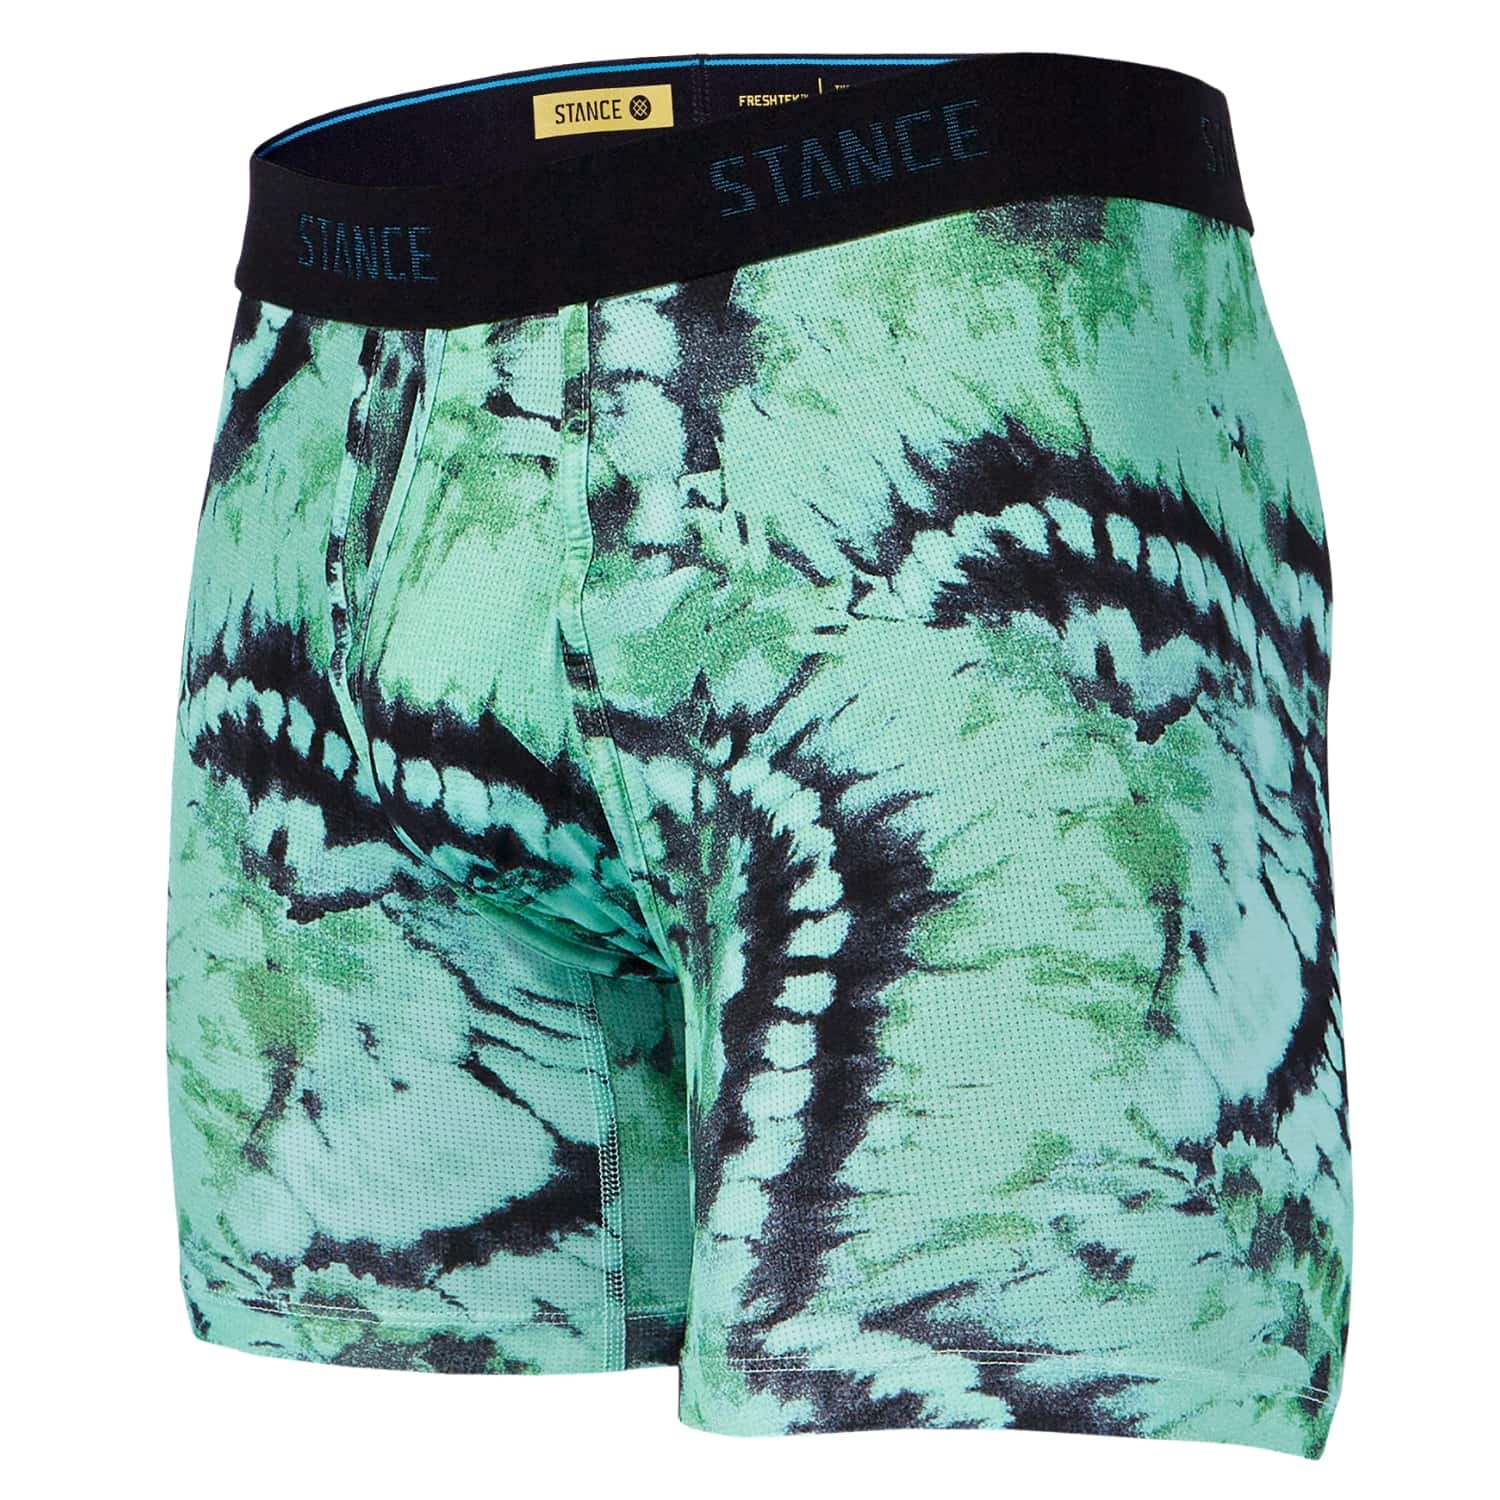 Stance Micro Dye Wholester Boxers - Jade - Mens Boxer Briefs Underwear by Stance